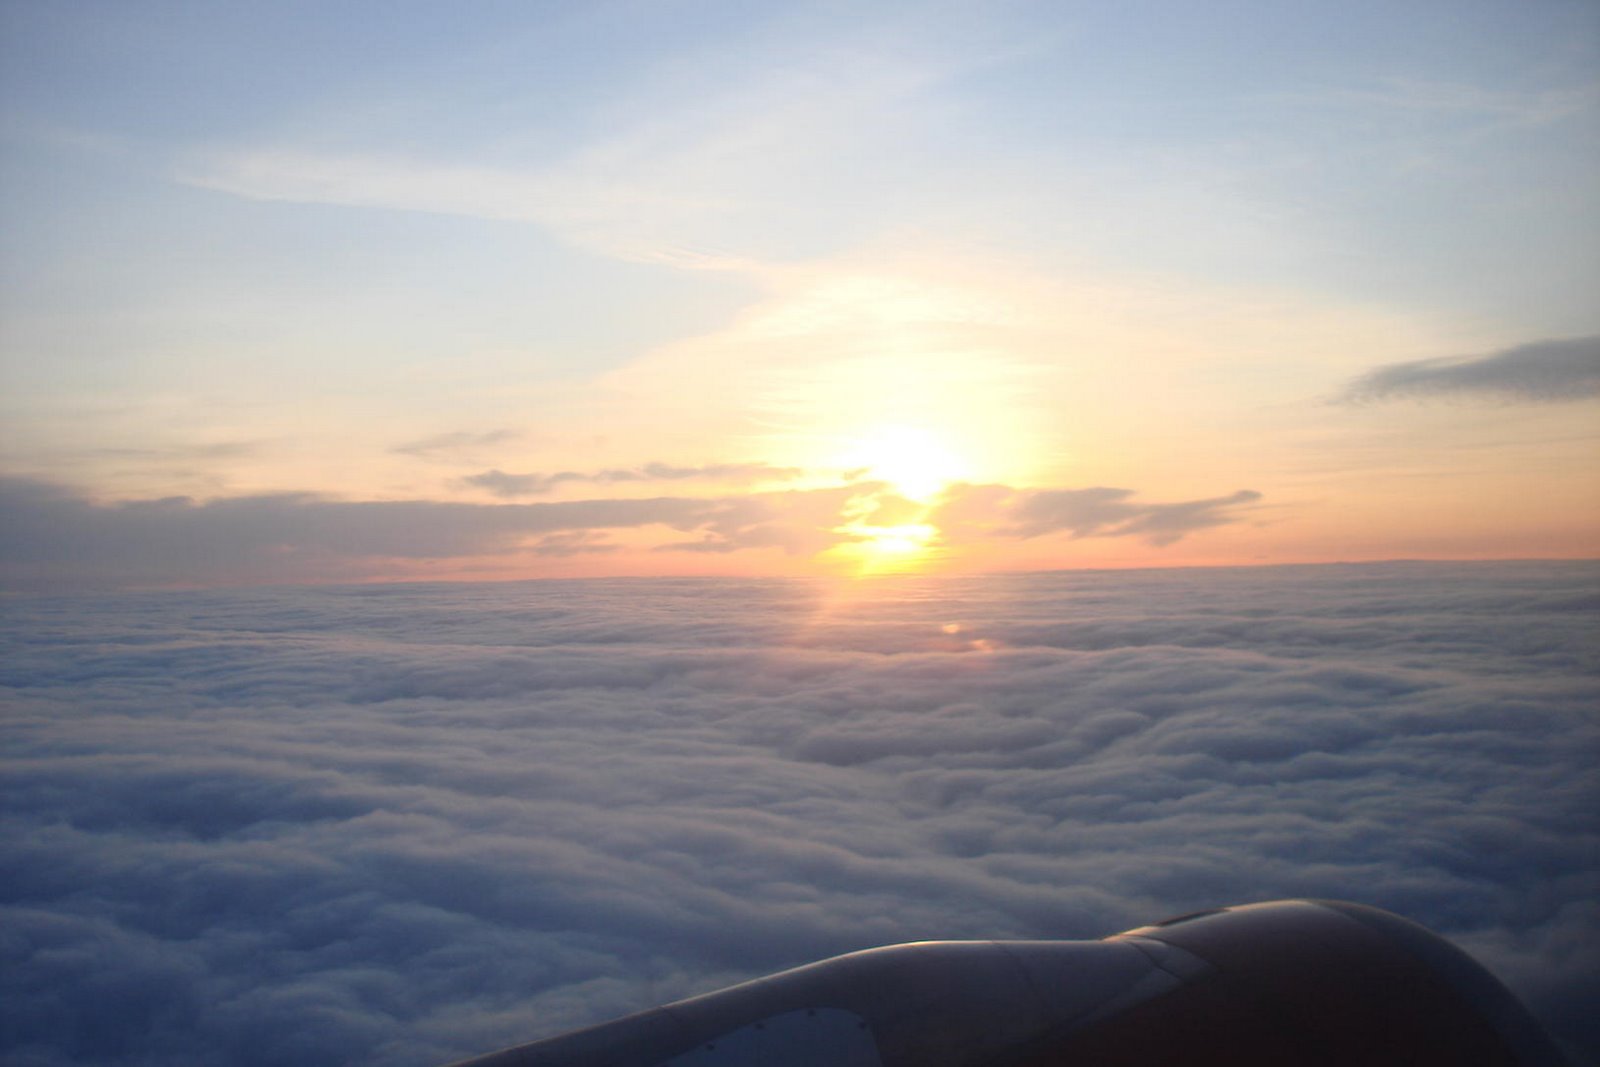 Sunrise - viewed out the window of bmi's BD79 - winging its way from Belfast City Airport to London Heathrow